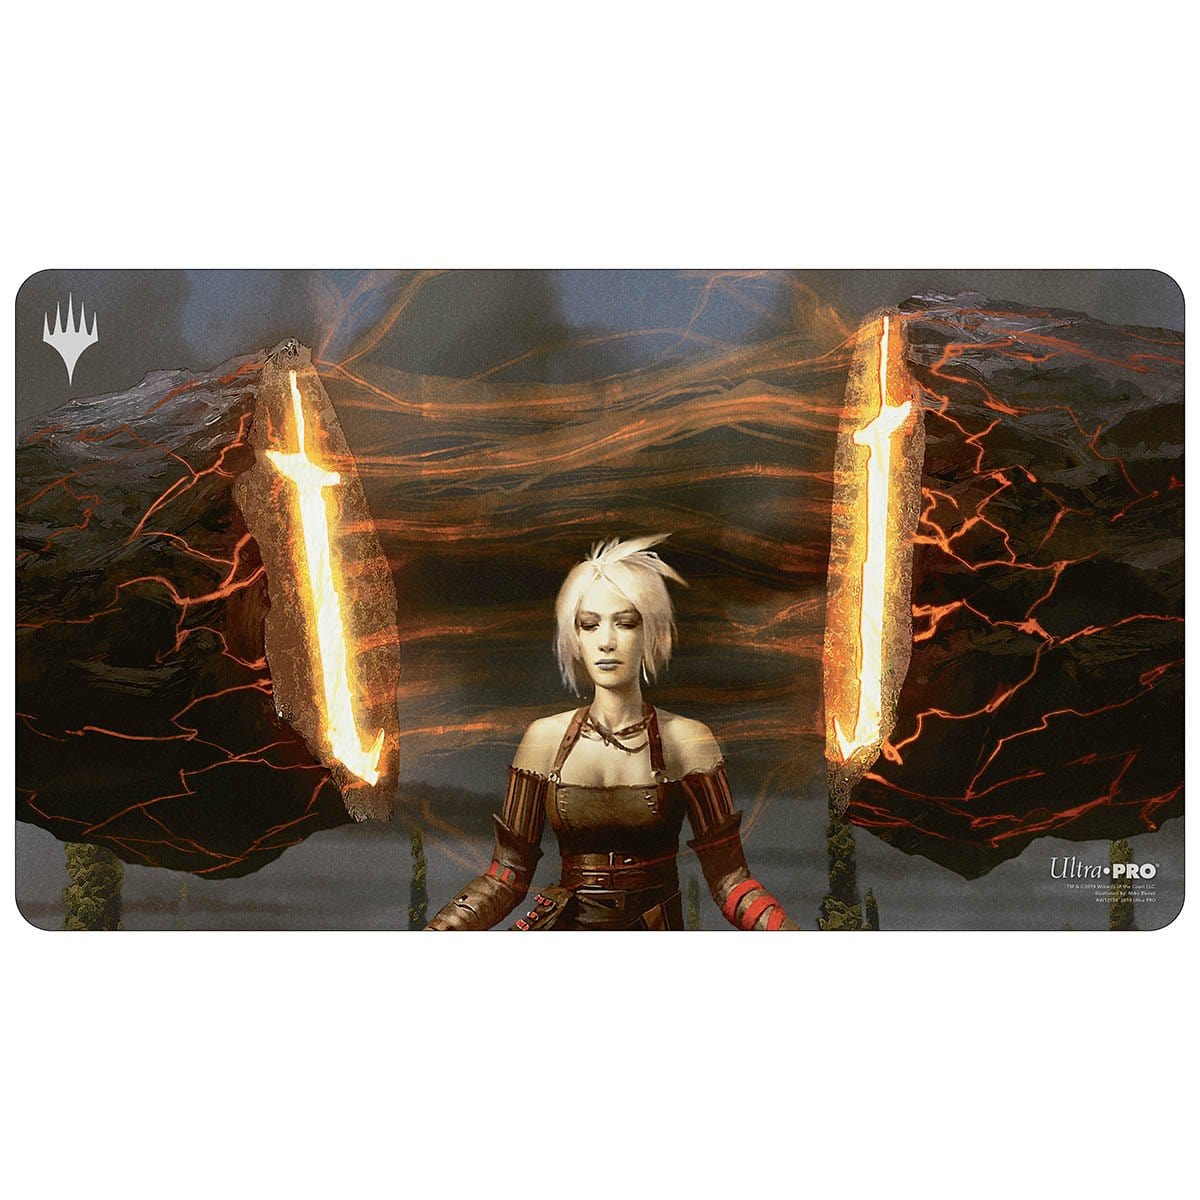 Stoneforge Mystic Playmat - Playmat - Original Magic Art - Accessories for Magic the Gathering and other card games